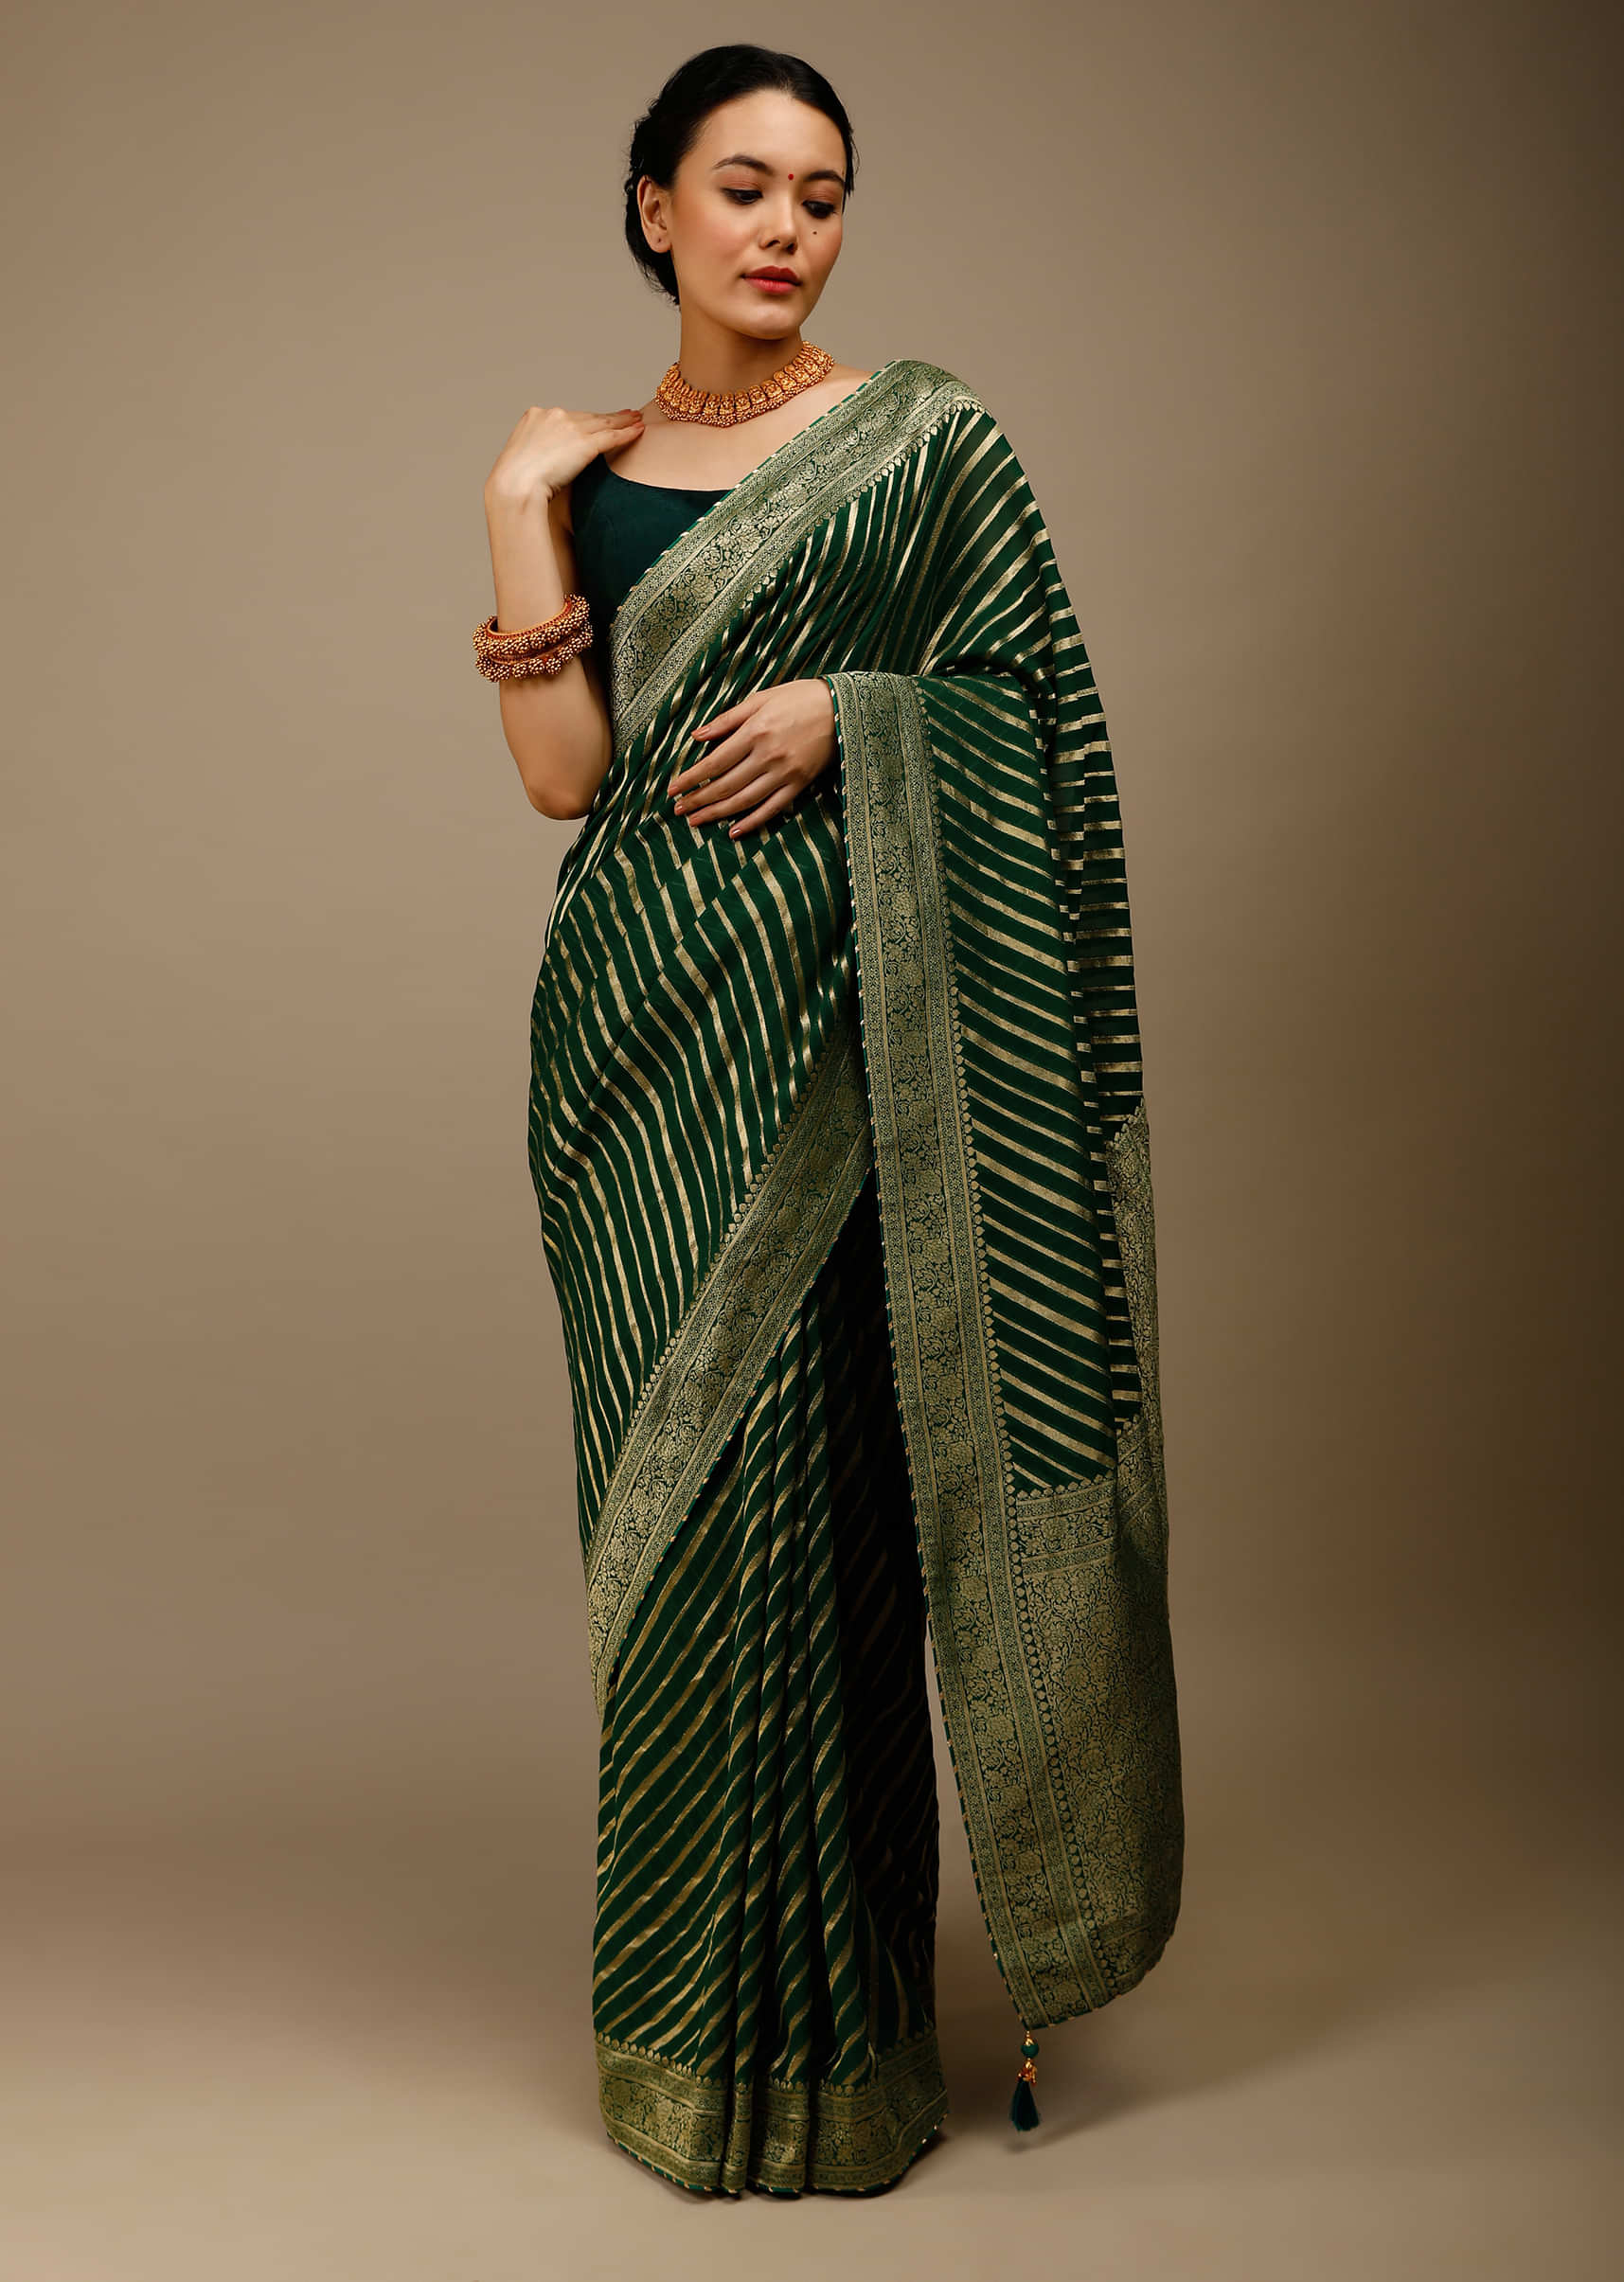 Bottle Green Saree In Georgette With Brocade Woven Diagonal Stripes And Floral Border  